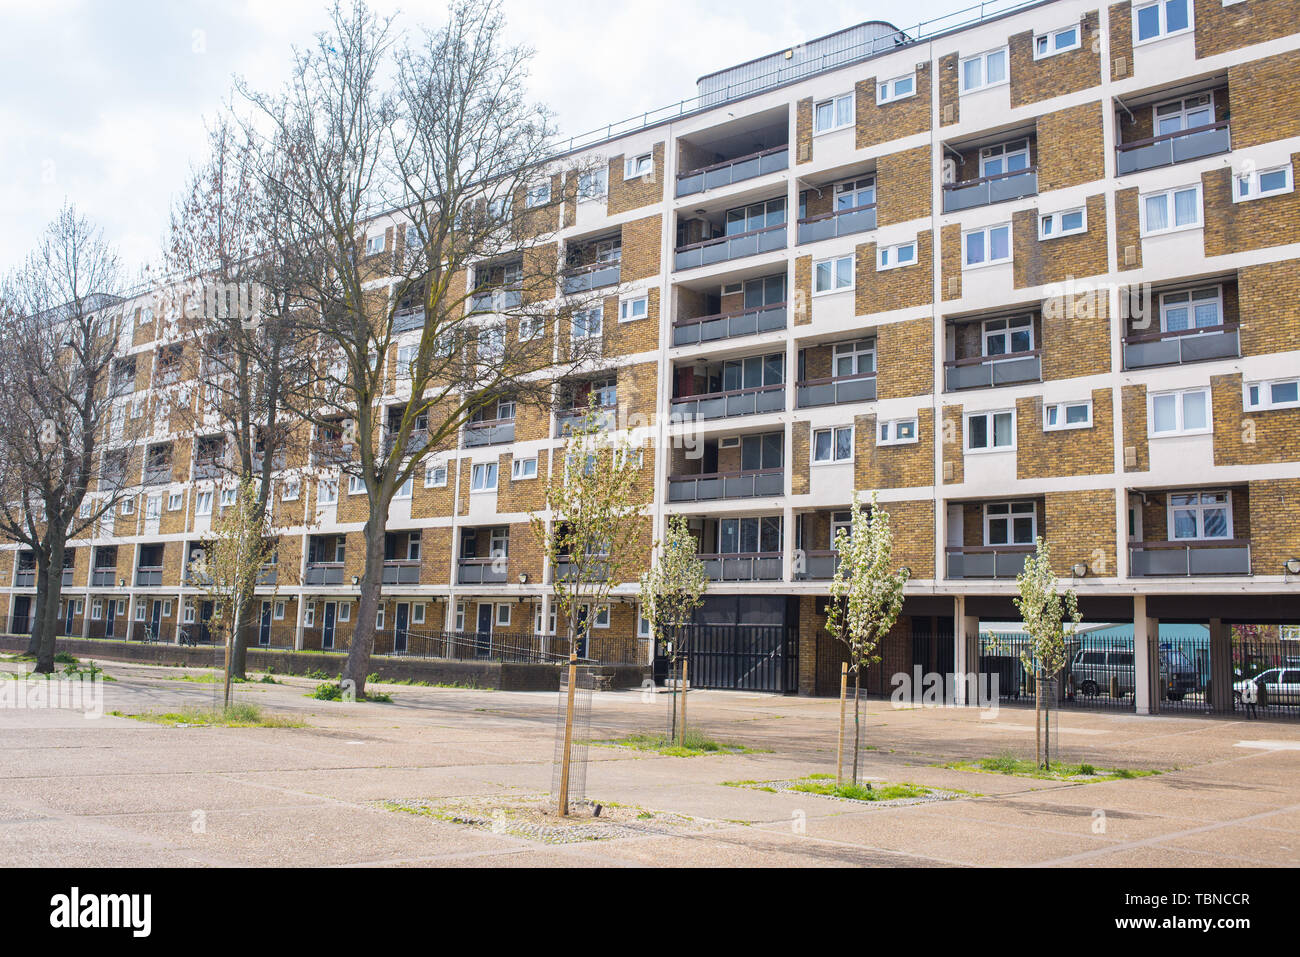 Council houses apartment blocks in Hackney East London, UK. Stock Photo